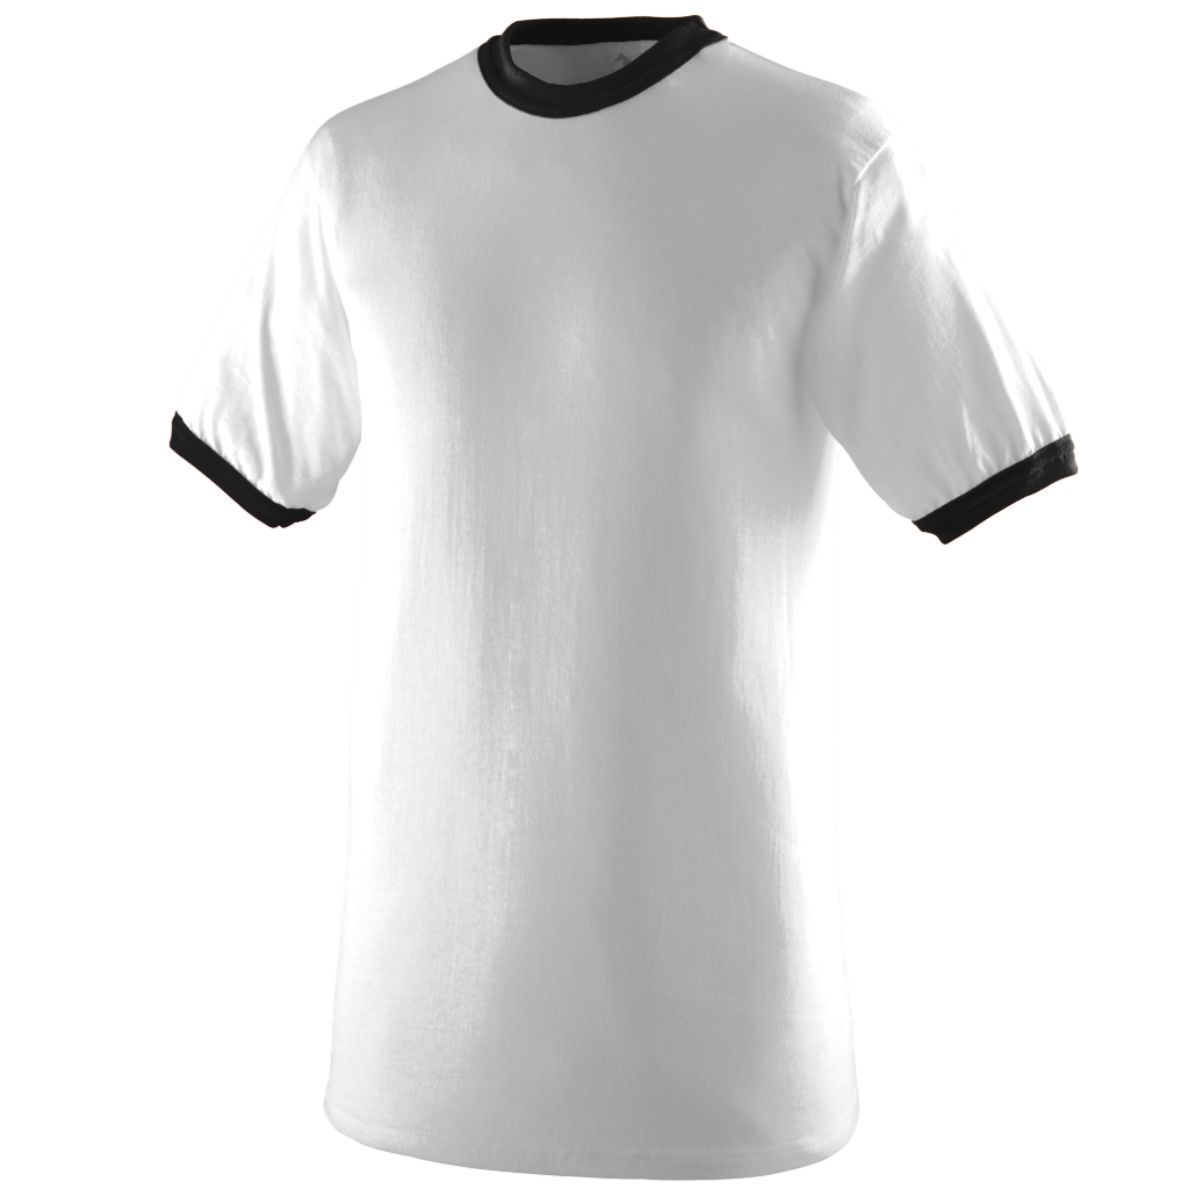 Augusta Sportswear Youth-Ringer T-Shirt in White/Black  -Part of the Youth, Youth-Tee-Shirt, T-Shirts, Augusta-Products, Soccer, Shirts, All-Sports-1 product lines at KanaleyCreations.com